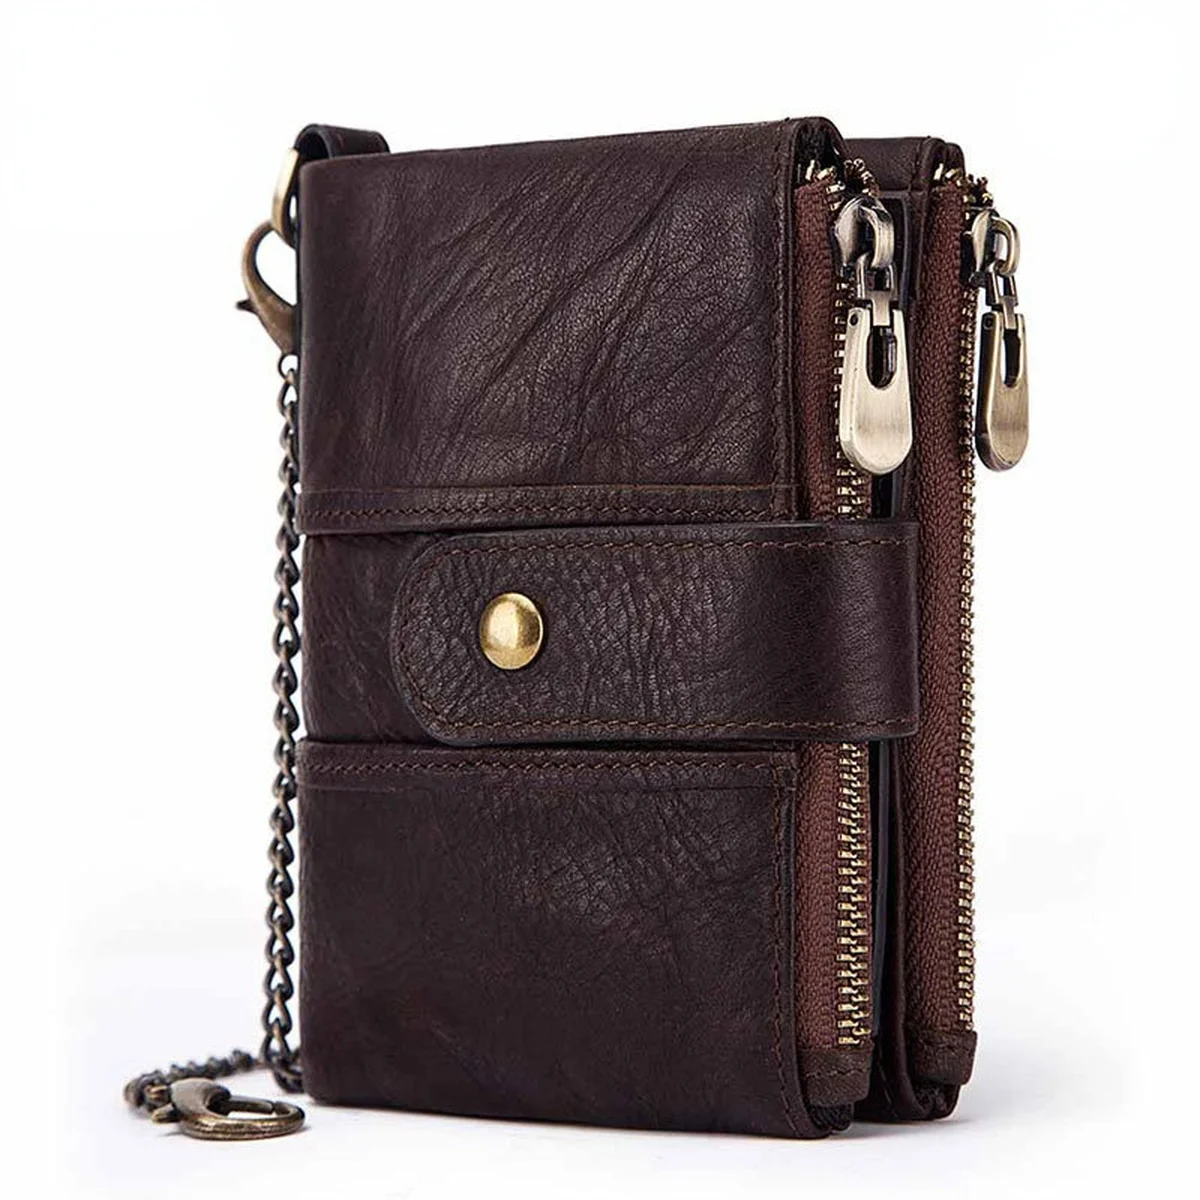 RFID Swiping Wallet Genuine Leather Bag Multifunctional Buckle Zipper Vintage Crazy Horse Leather Men's Bag Leisure Coin Purse